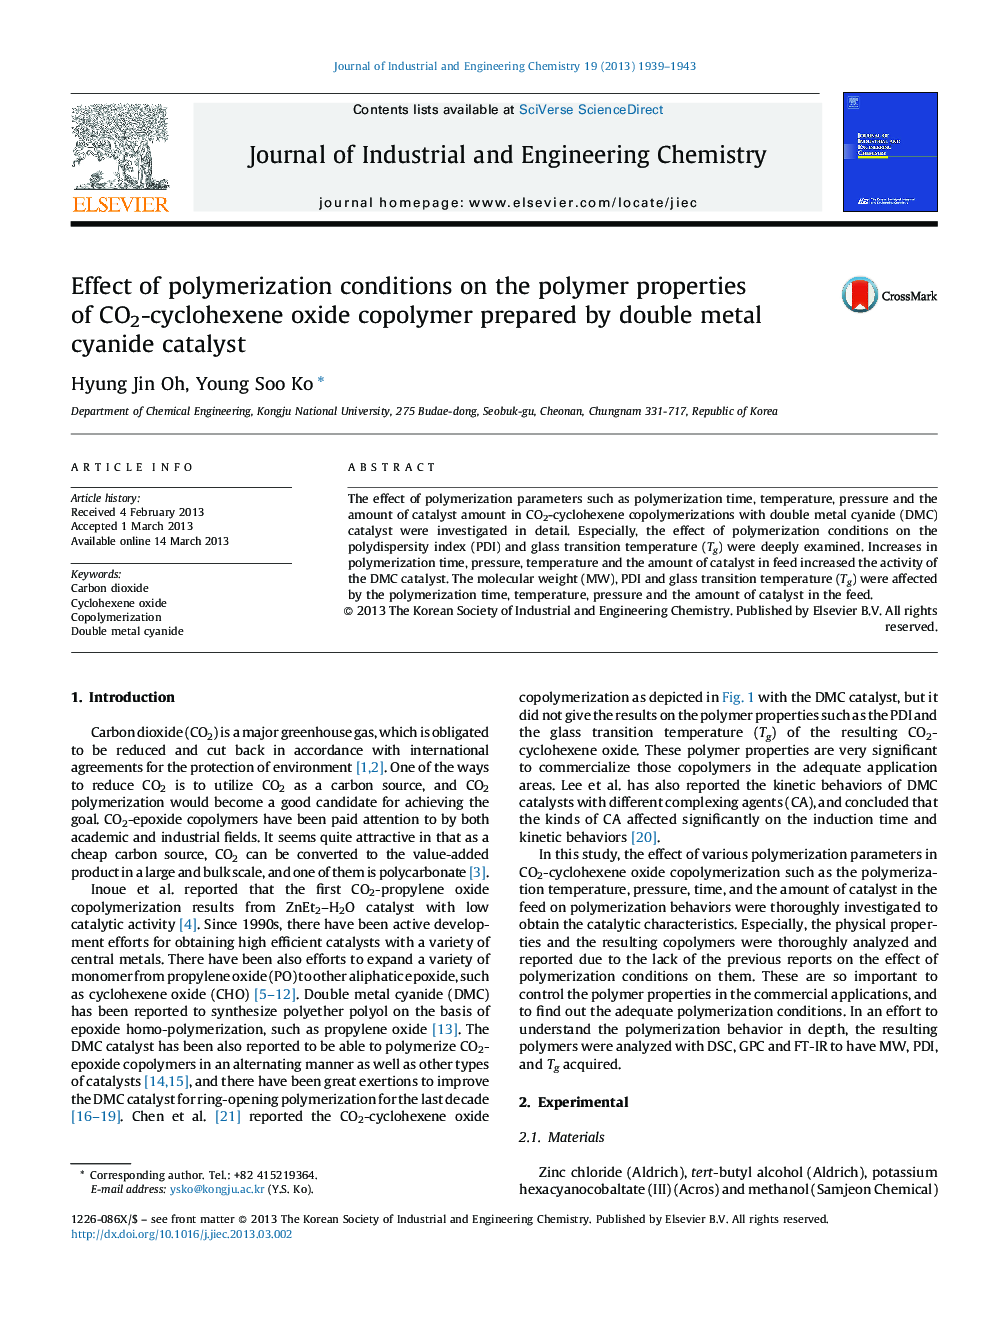 Effect of polymerization conditions on the polymer properties of CO2-cyclohexene oxide copolymer prepared by double metal cyanide catalyst